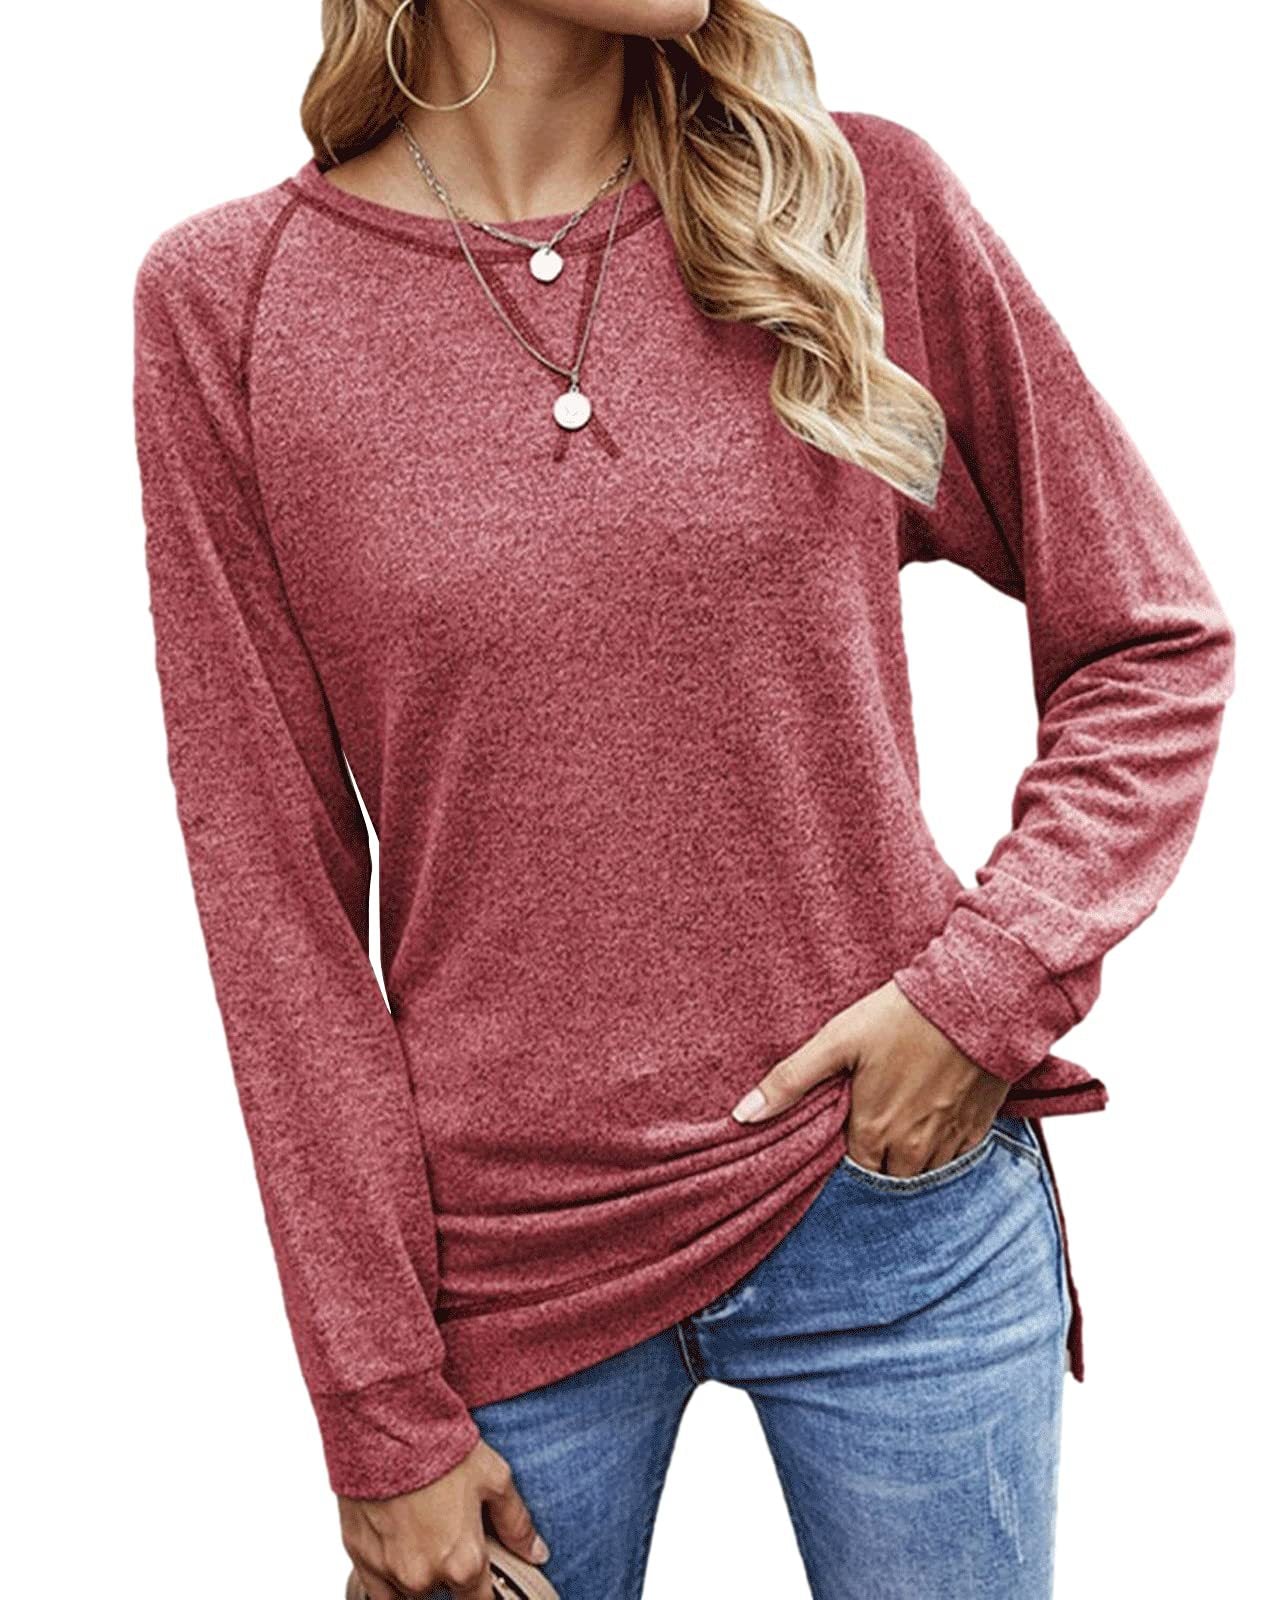 Women's Fashion Round Neck Solid Color Top